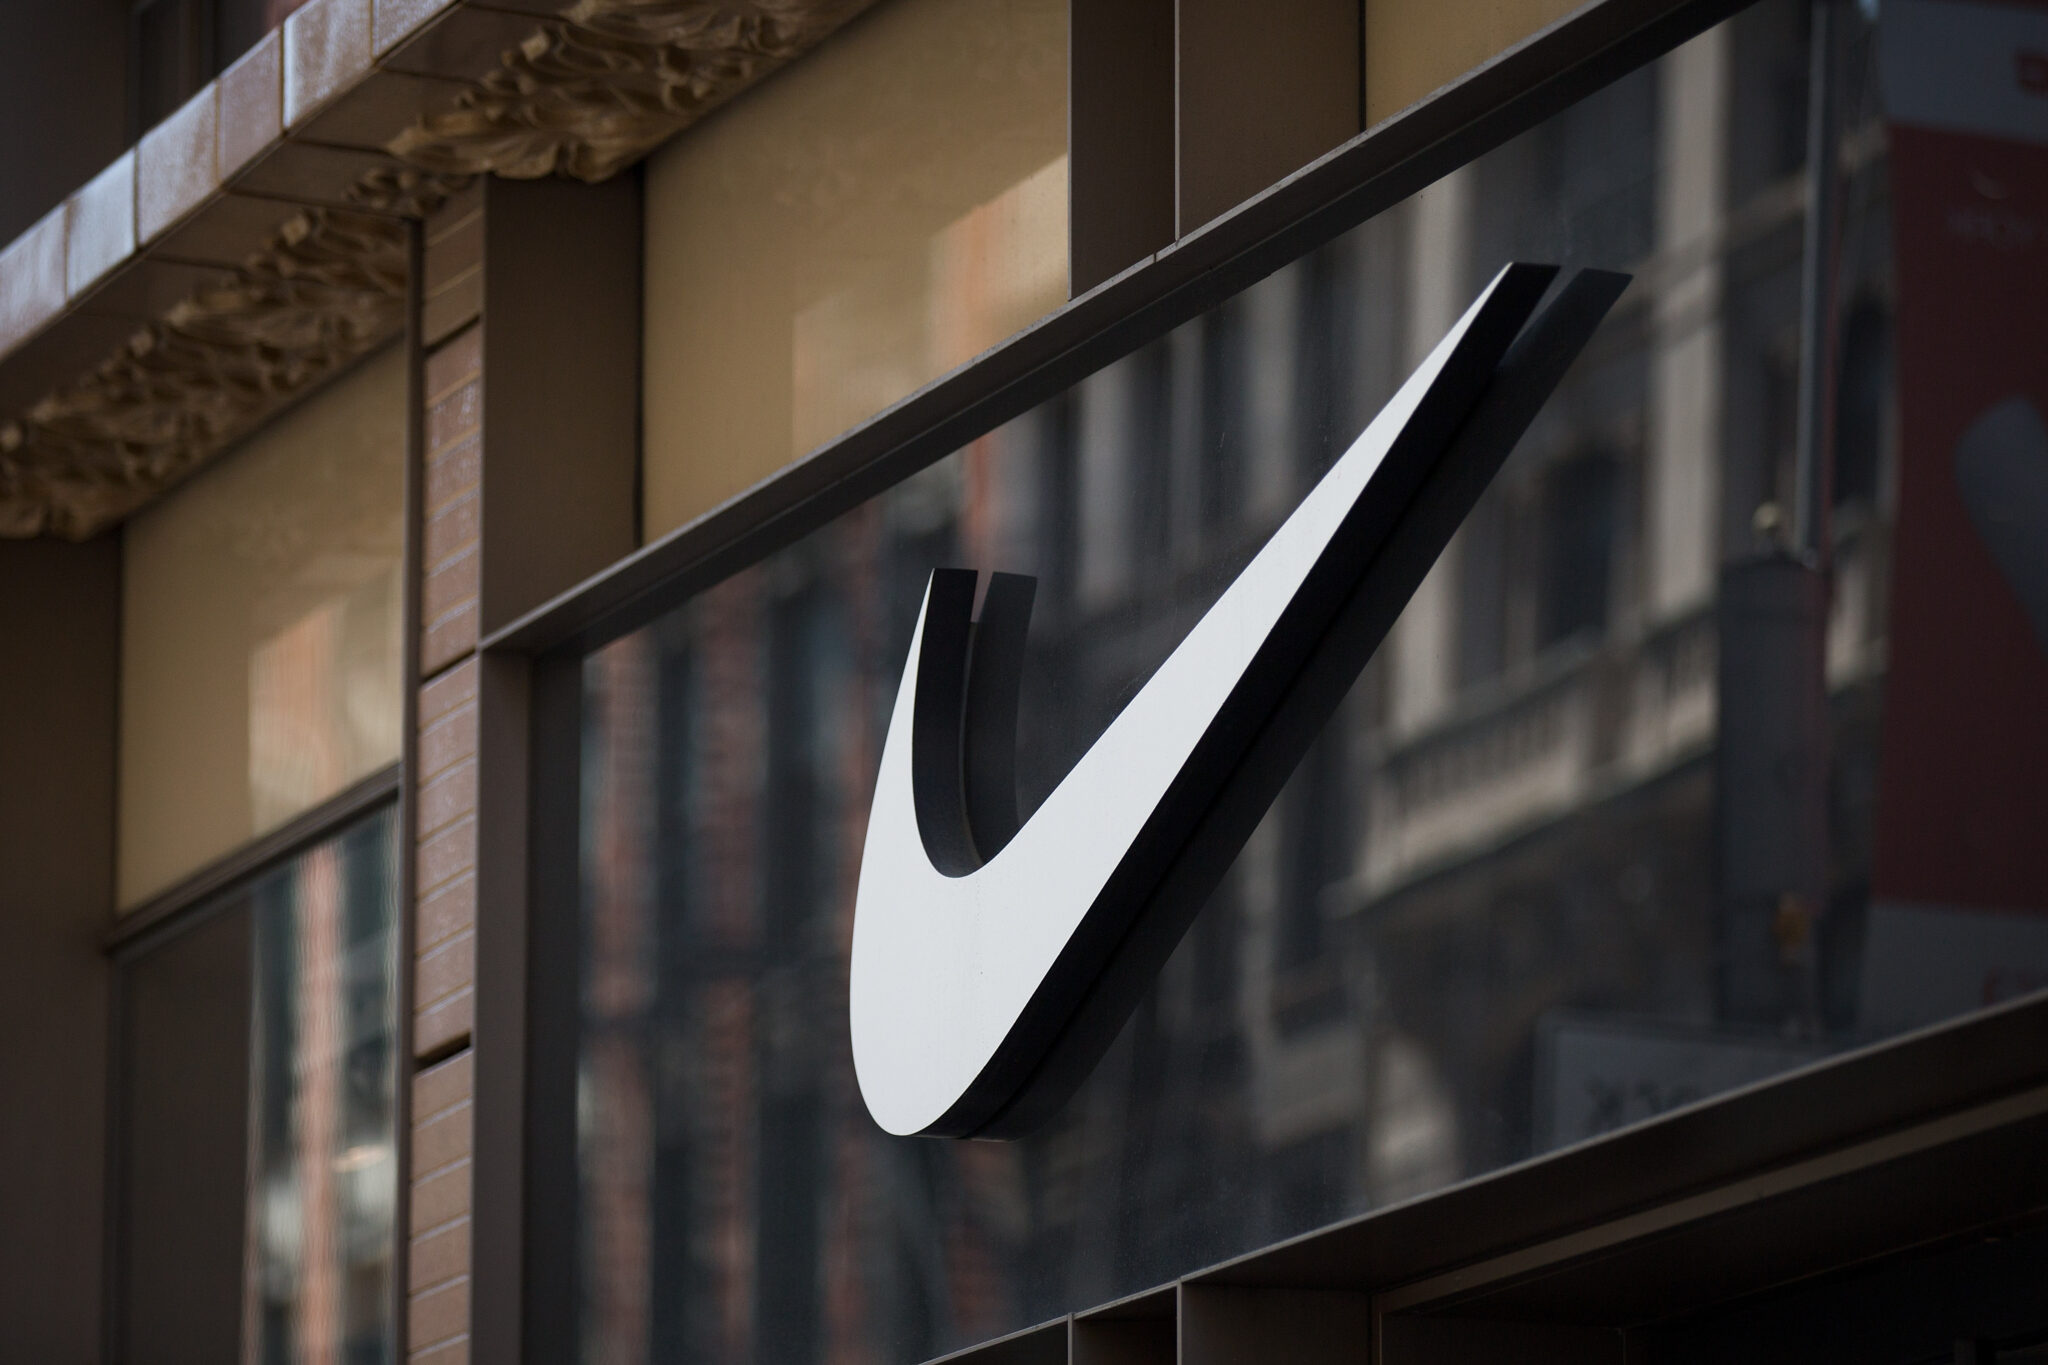 NEW YORK, NY - JUNE 15: The Nike 'swoosh' logo is displayed on the outside of the Nike SoHo store, June 15, 2017 in New York City. Nike announced plans on Thursday to cut about 2 percent of its global workforce. (Photo by Drew Angerer/Getty Images)